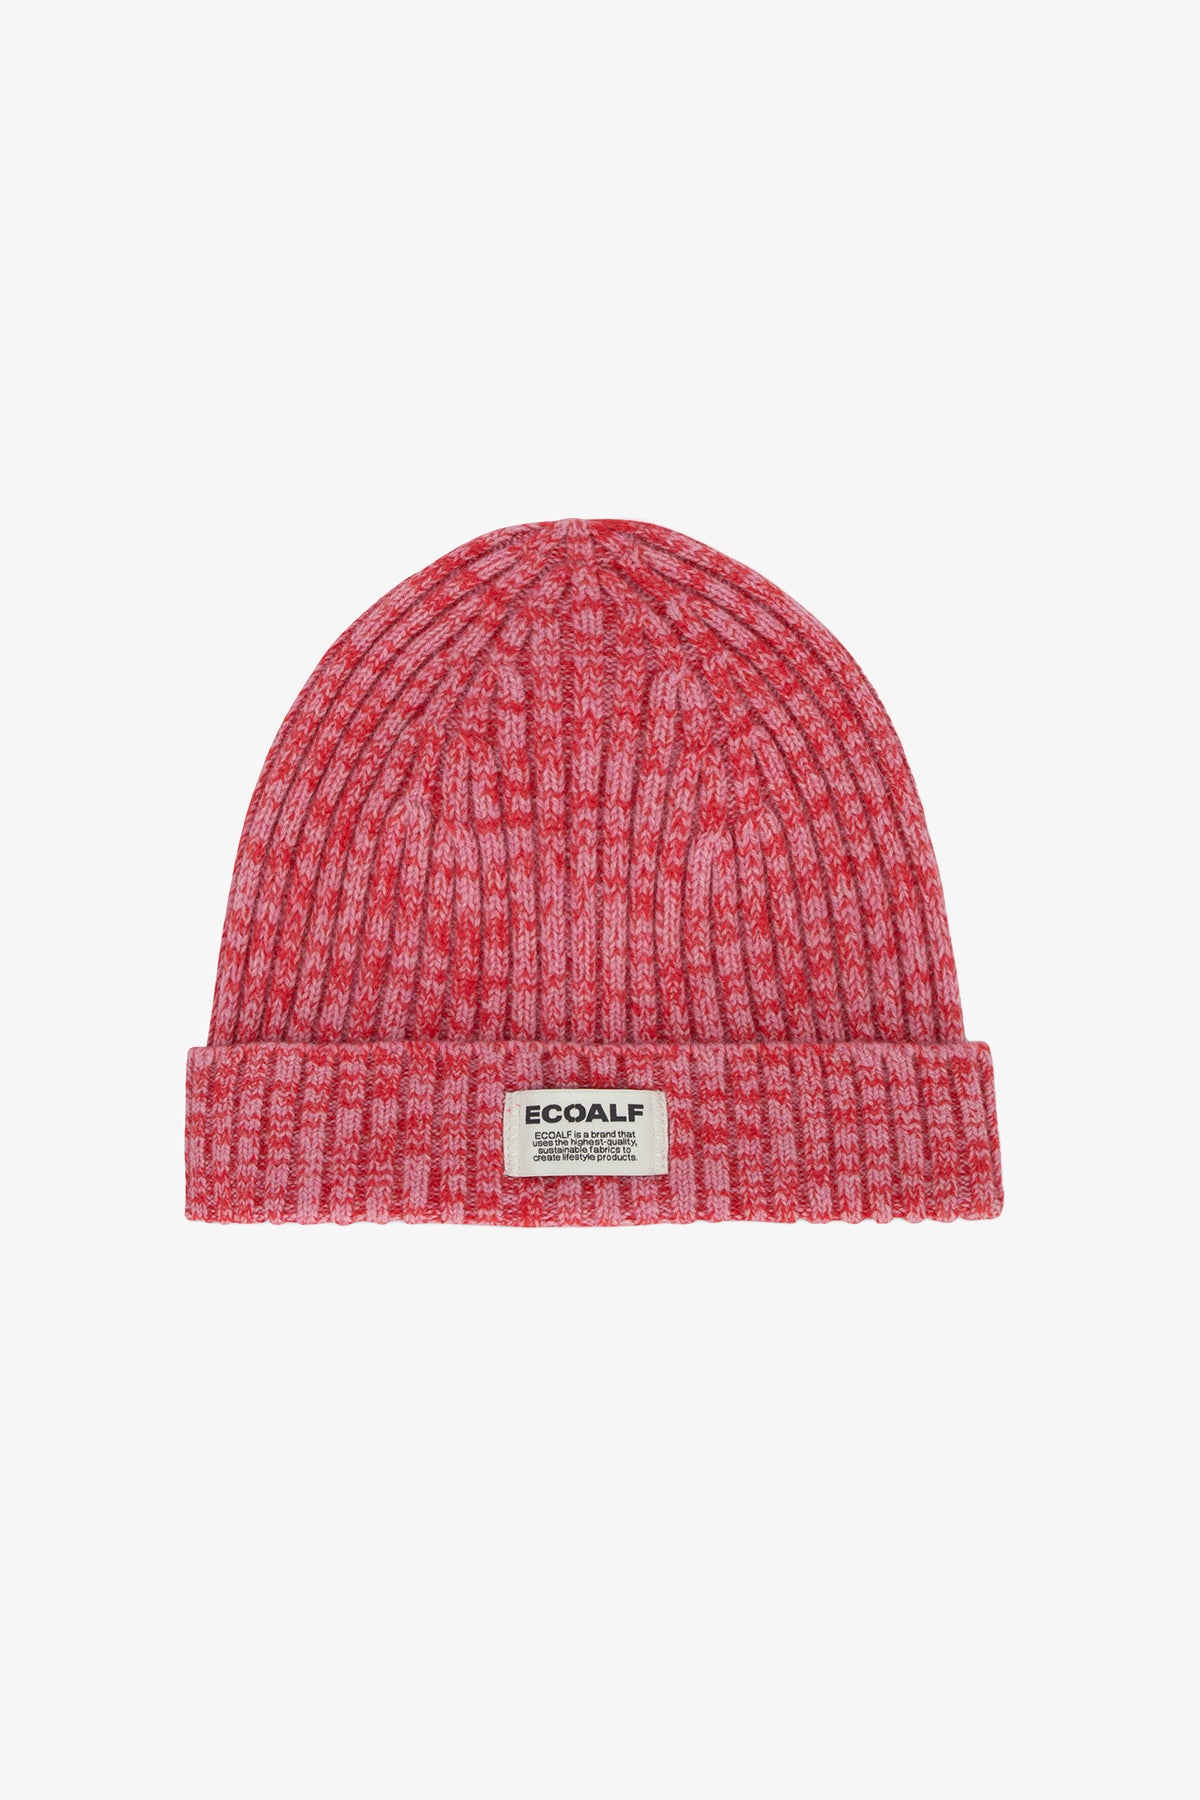 PINK THICK HAT  